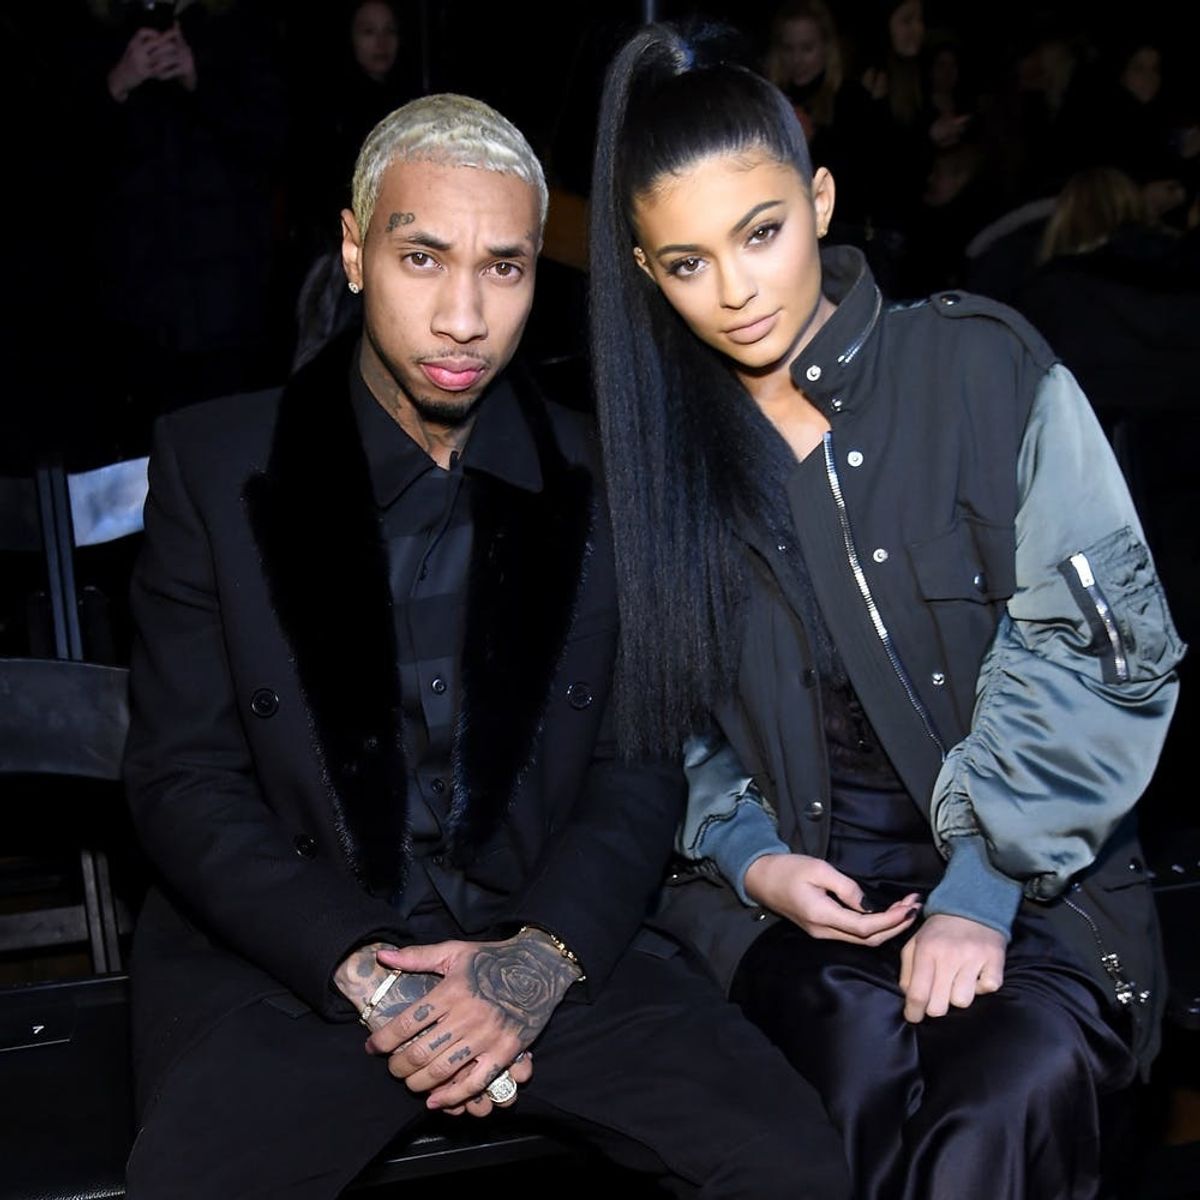 This Is the Insane Gift Tyga Just Bought Kylie Jenner for Her 19th Birthday